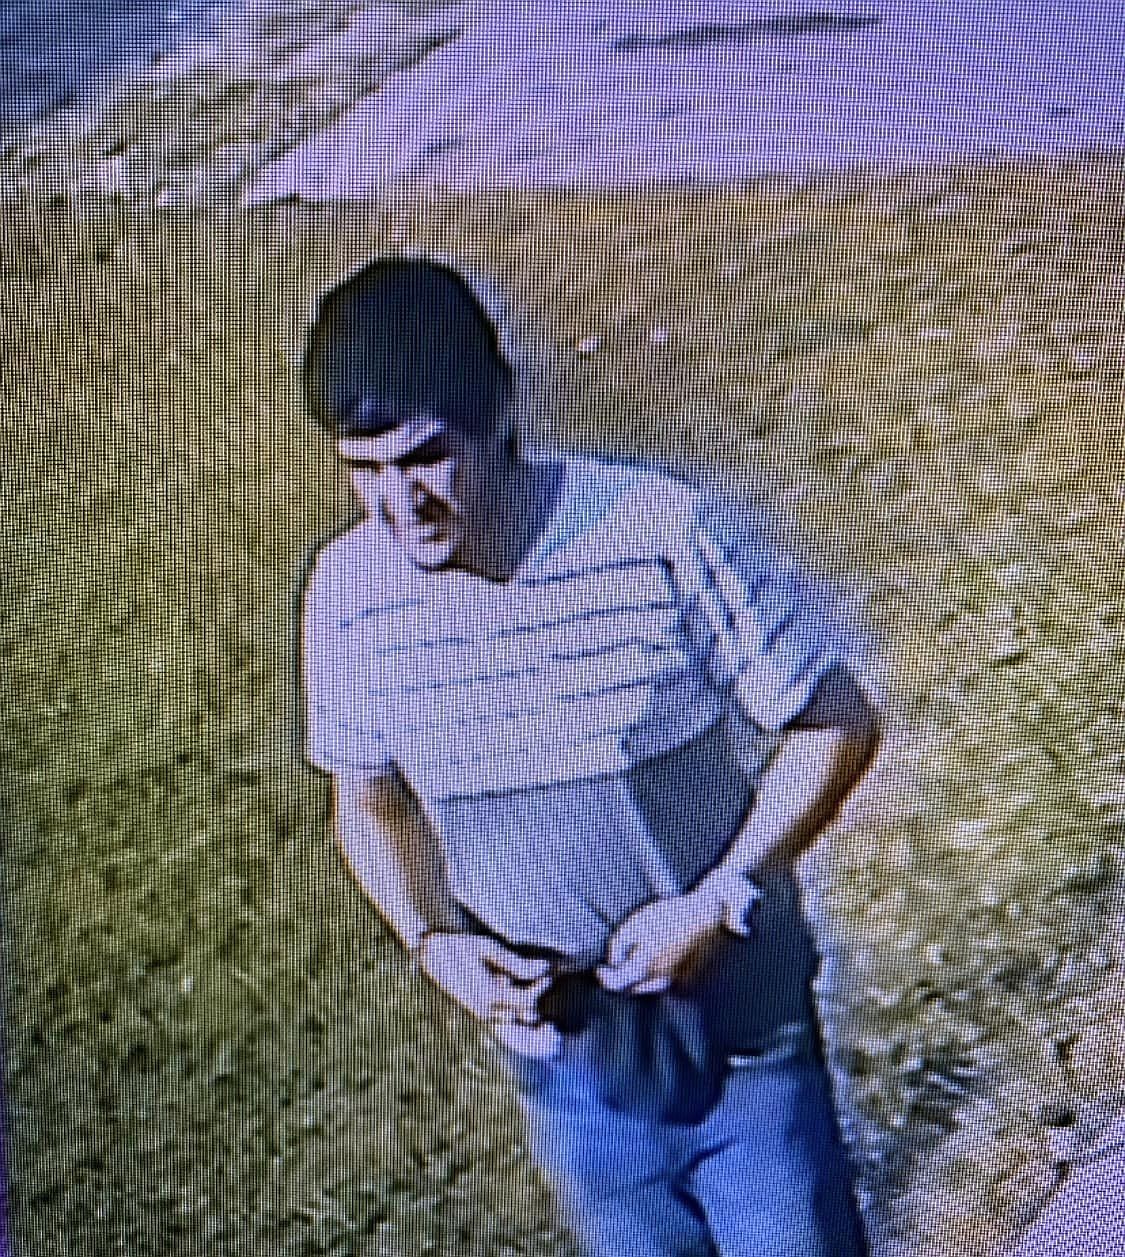 Two suspects are being sought in connection with burglaries near Othello.